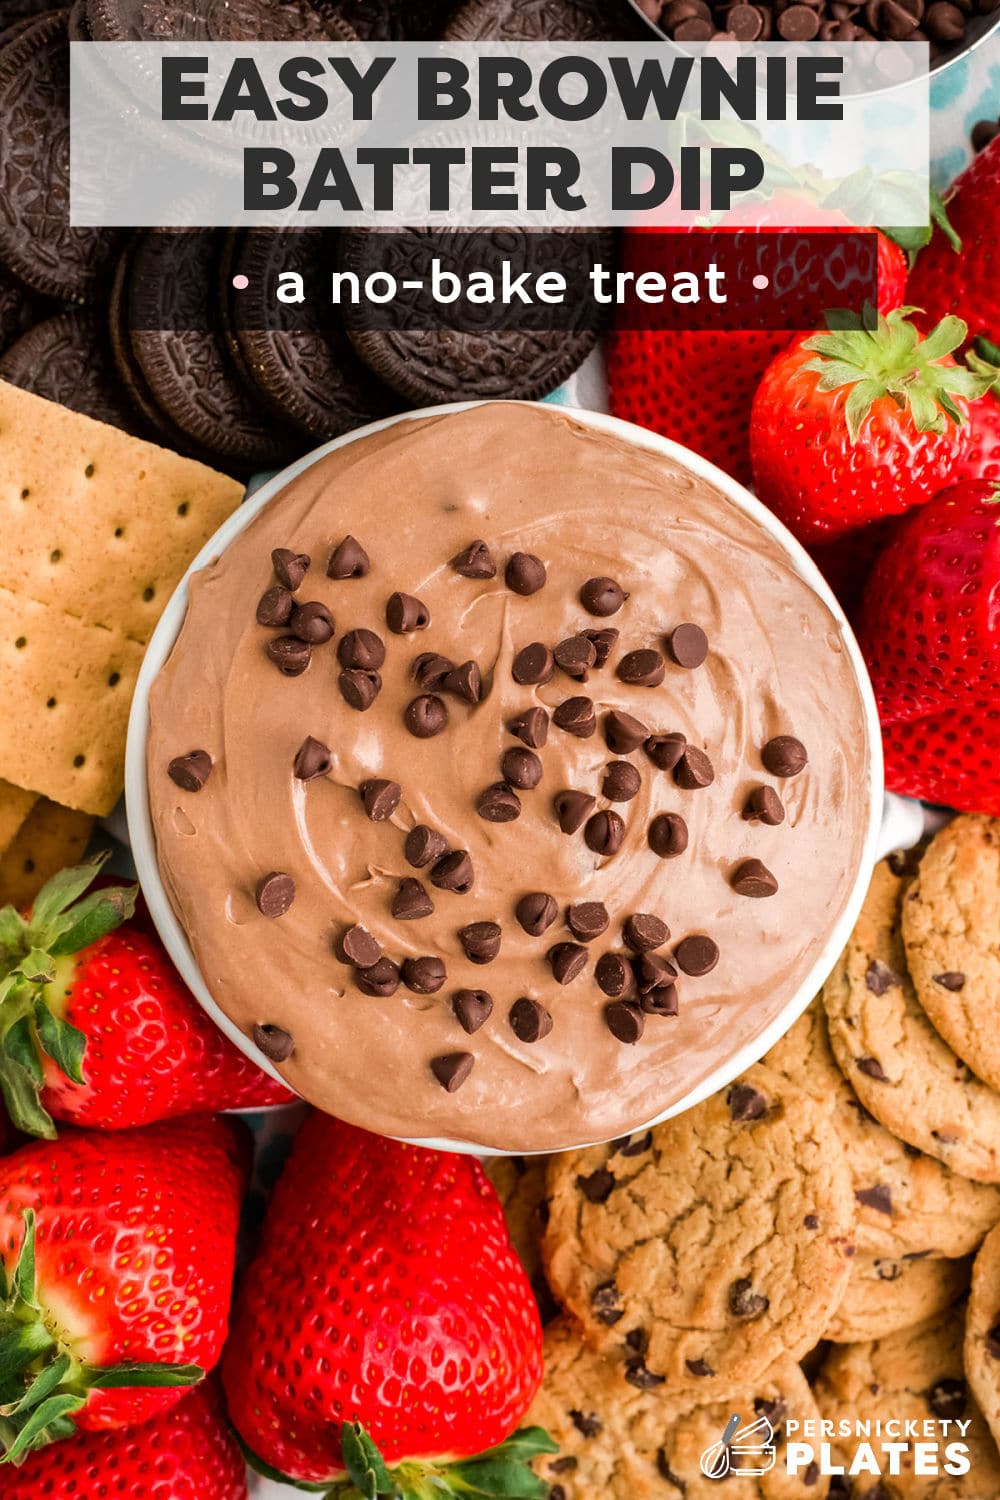 Easy brownie batter dip is the perfect dessert dip for your next family movie night or when you need a quick and easy chocolate craving fix! This no-bake dip is made in 10 minutes without any raw eggs and is creamy, luscious, and perfectly safe to eat. Serve with fresh fruit, cookies, pretzels, and any of your favorite dippers! | www.persnicketyplates.com